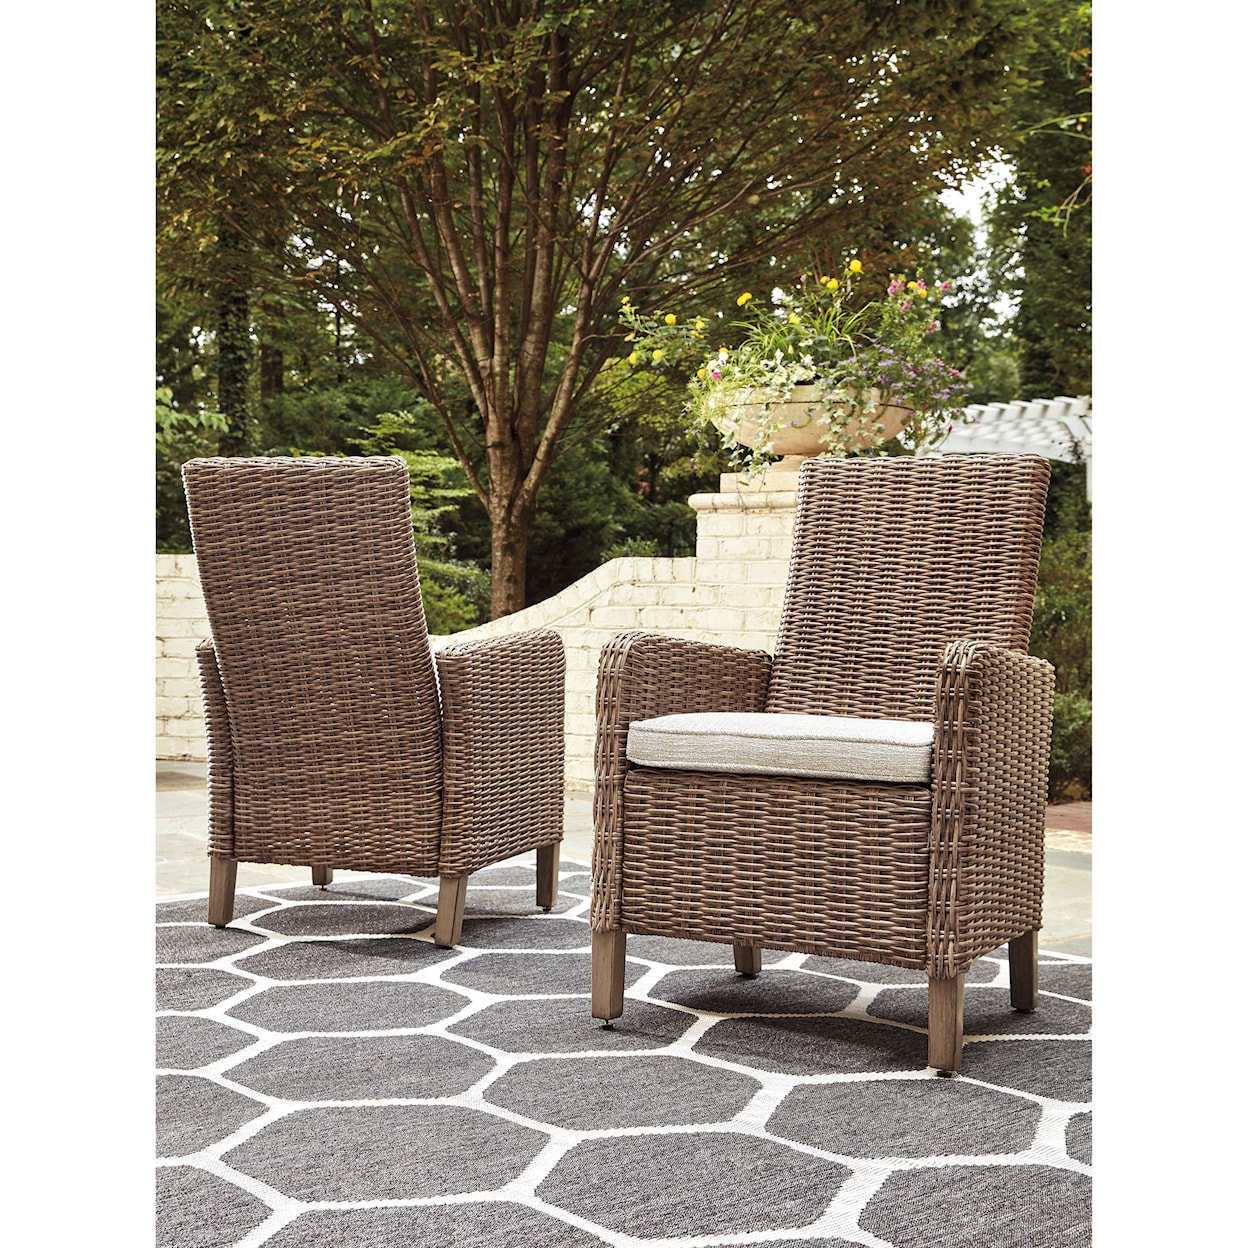 Ashley Furniture Signature Design Beachcroft Set of 2 Arm Chairs with Cushion